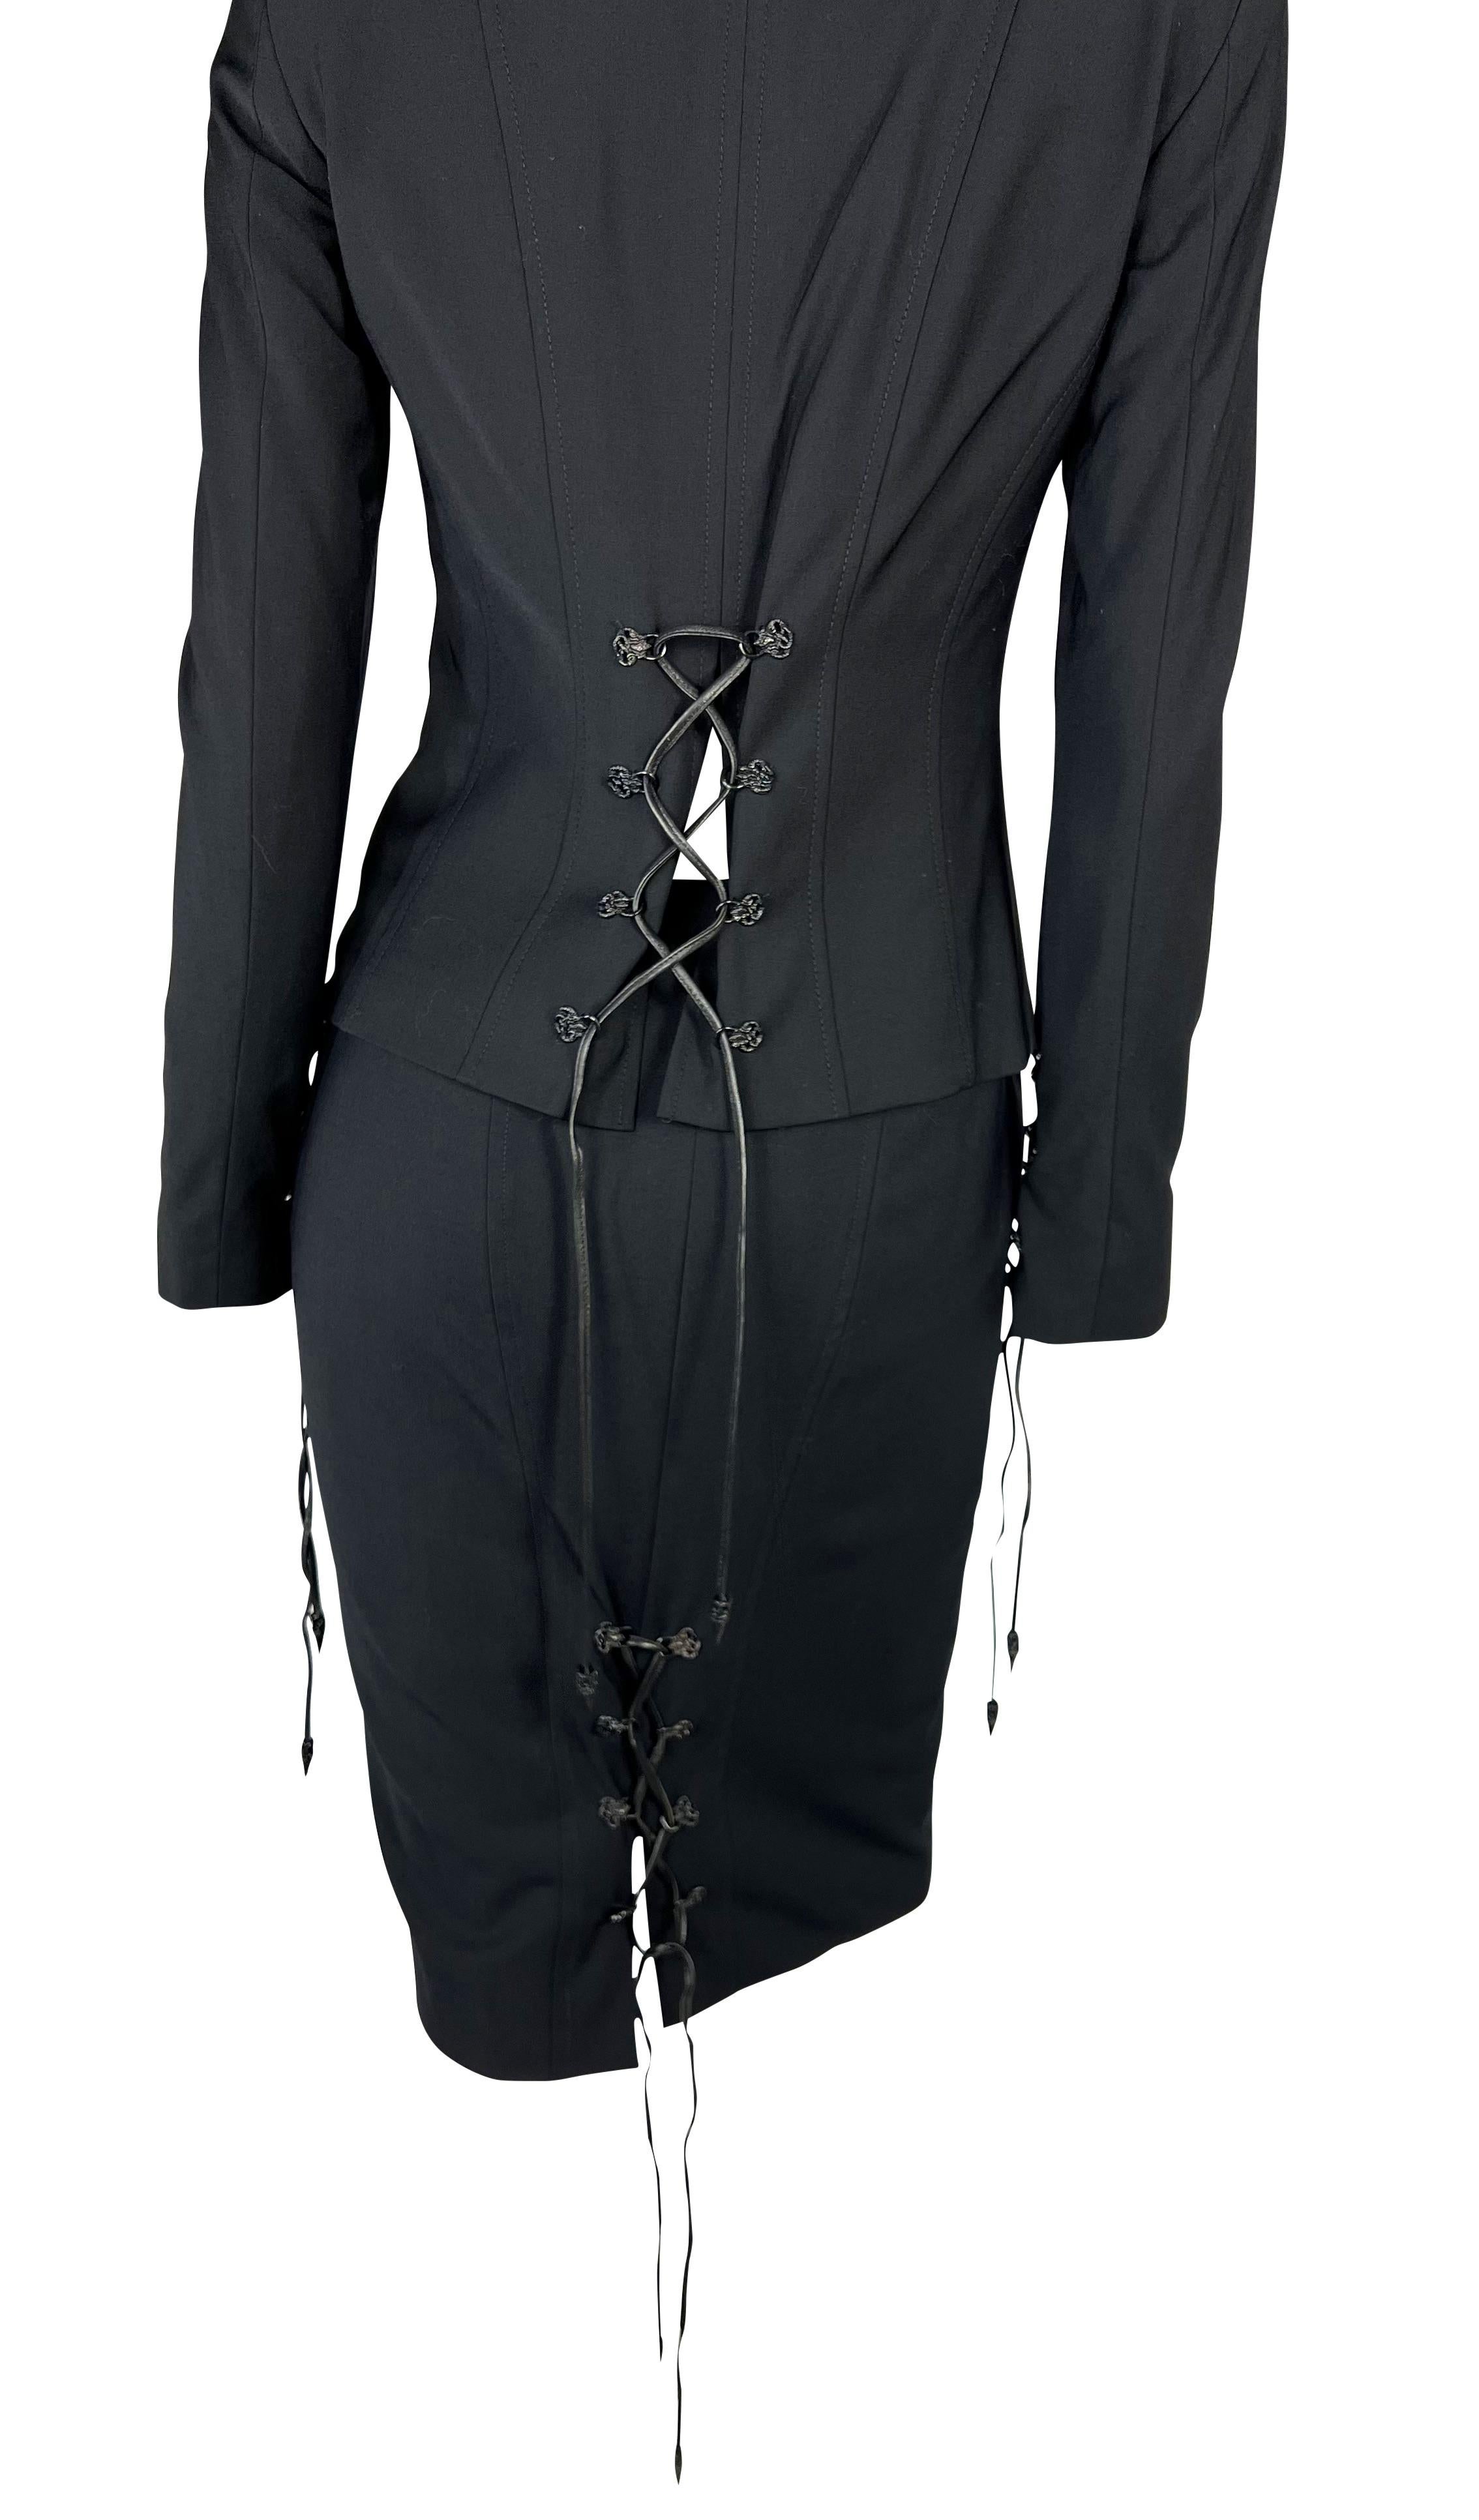 Presenting an incredible black lace-up accented Versace skirt suit set designed by Donatella Versace. This fabulous skirt suit from the Fall/Winter 2003 collection includes a black zip-up jacket and matching skirt. The jacket features a deep